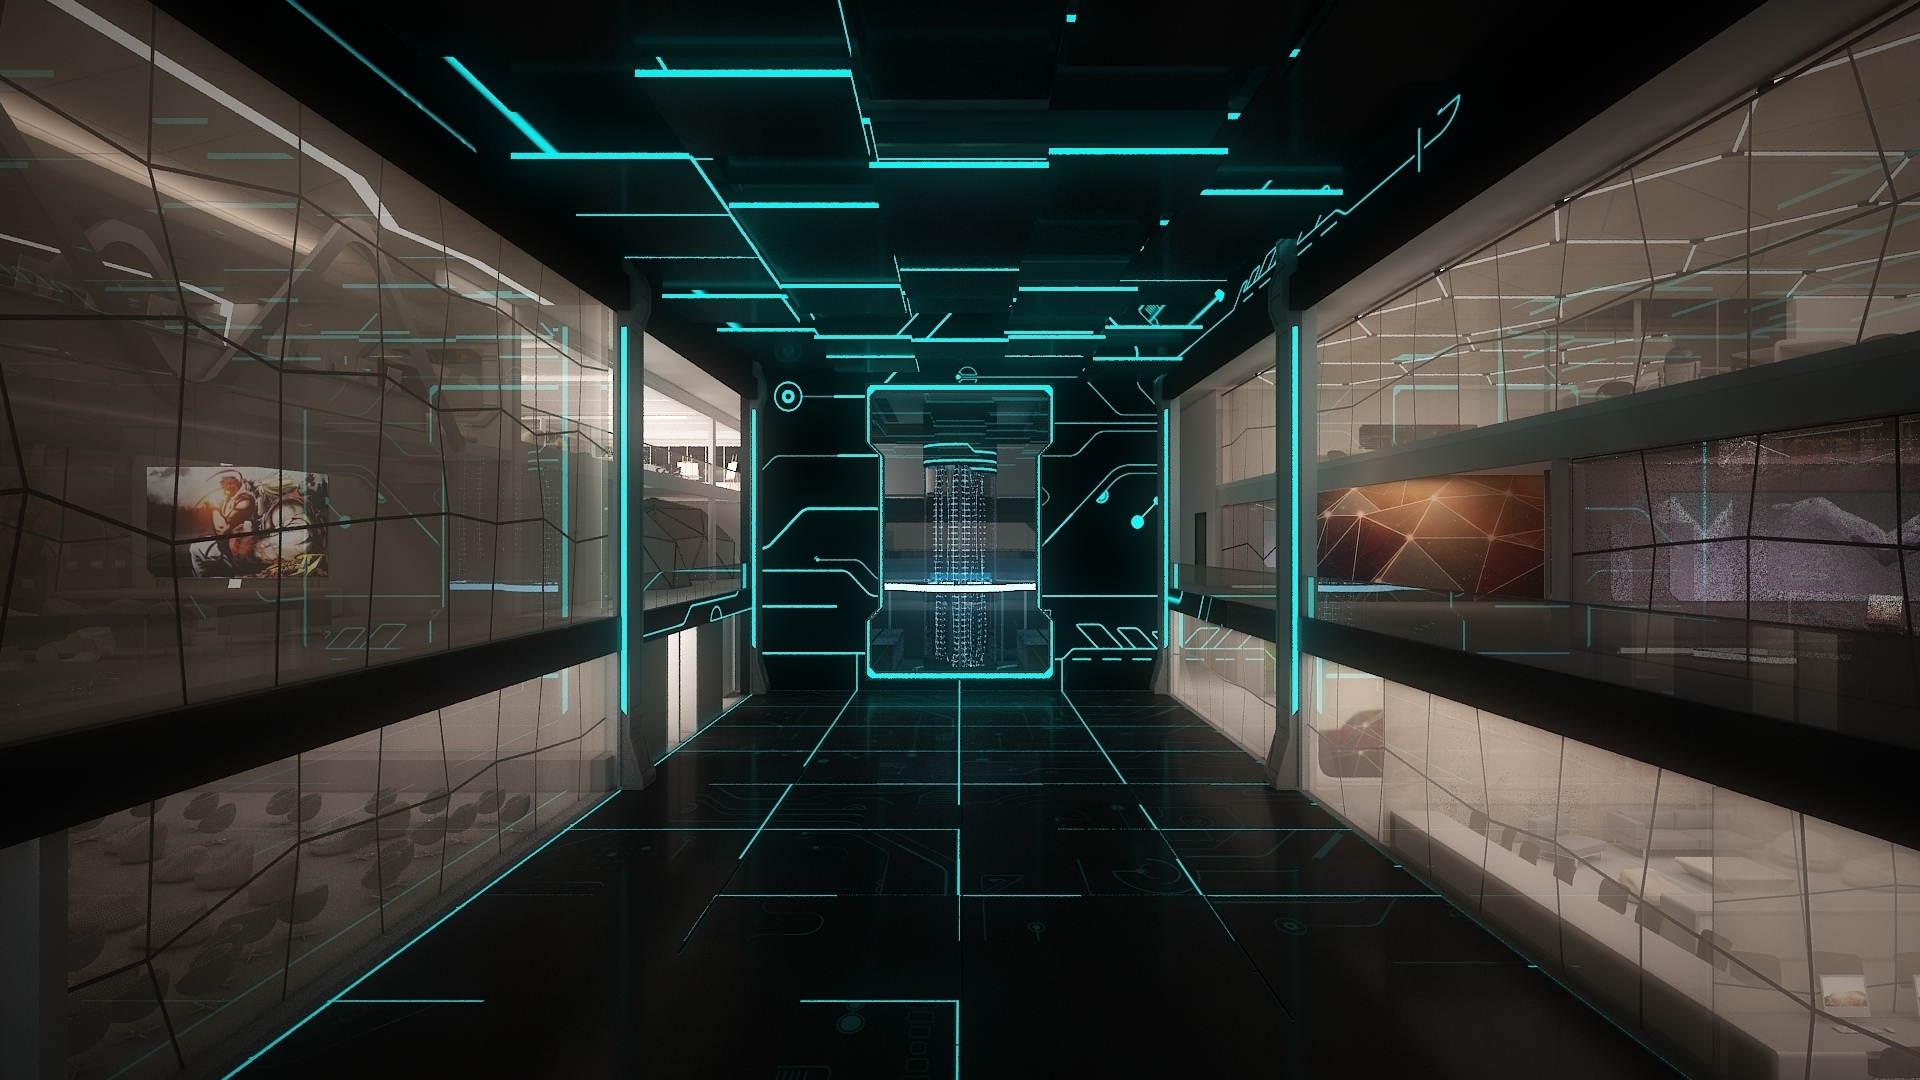 space, Monitors, Line, Staley, Room, Technology, Sci fi, Science, Computer, Futuristic Wallpaper